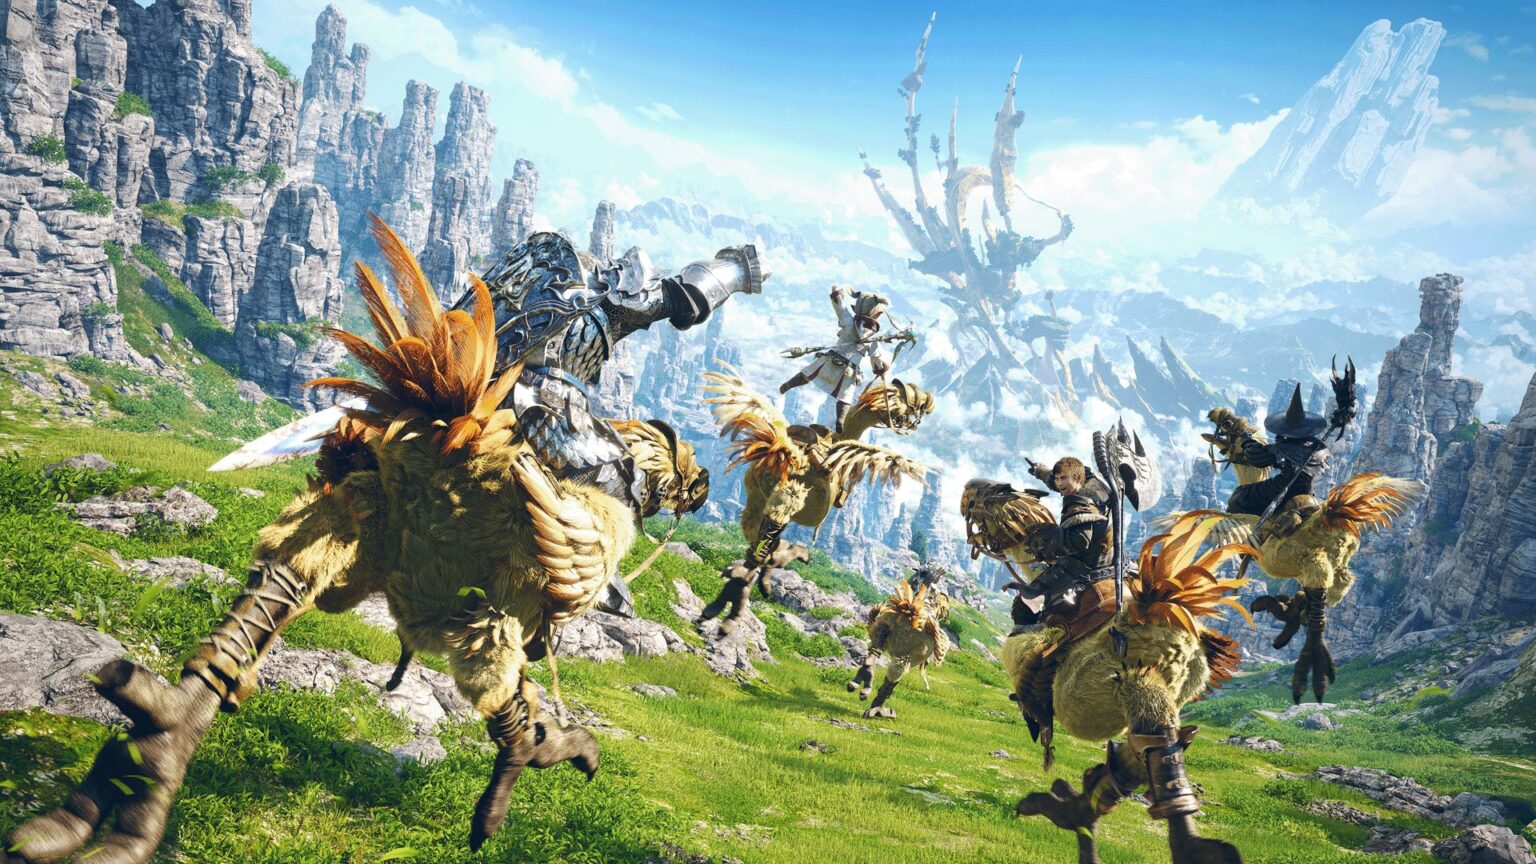 FINAL FANTASY XIV Xbox Series X|S Open Beta Test Launches This February